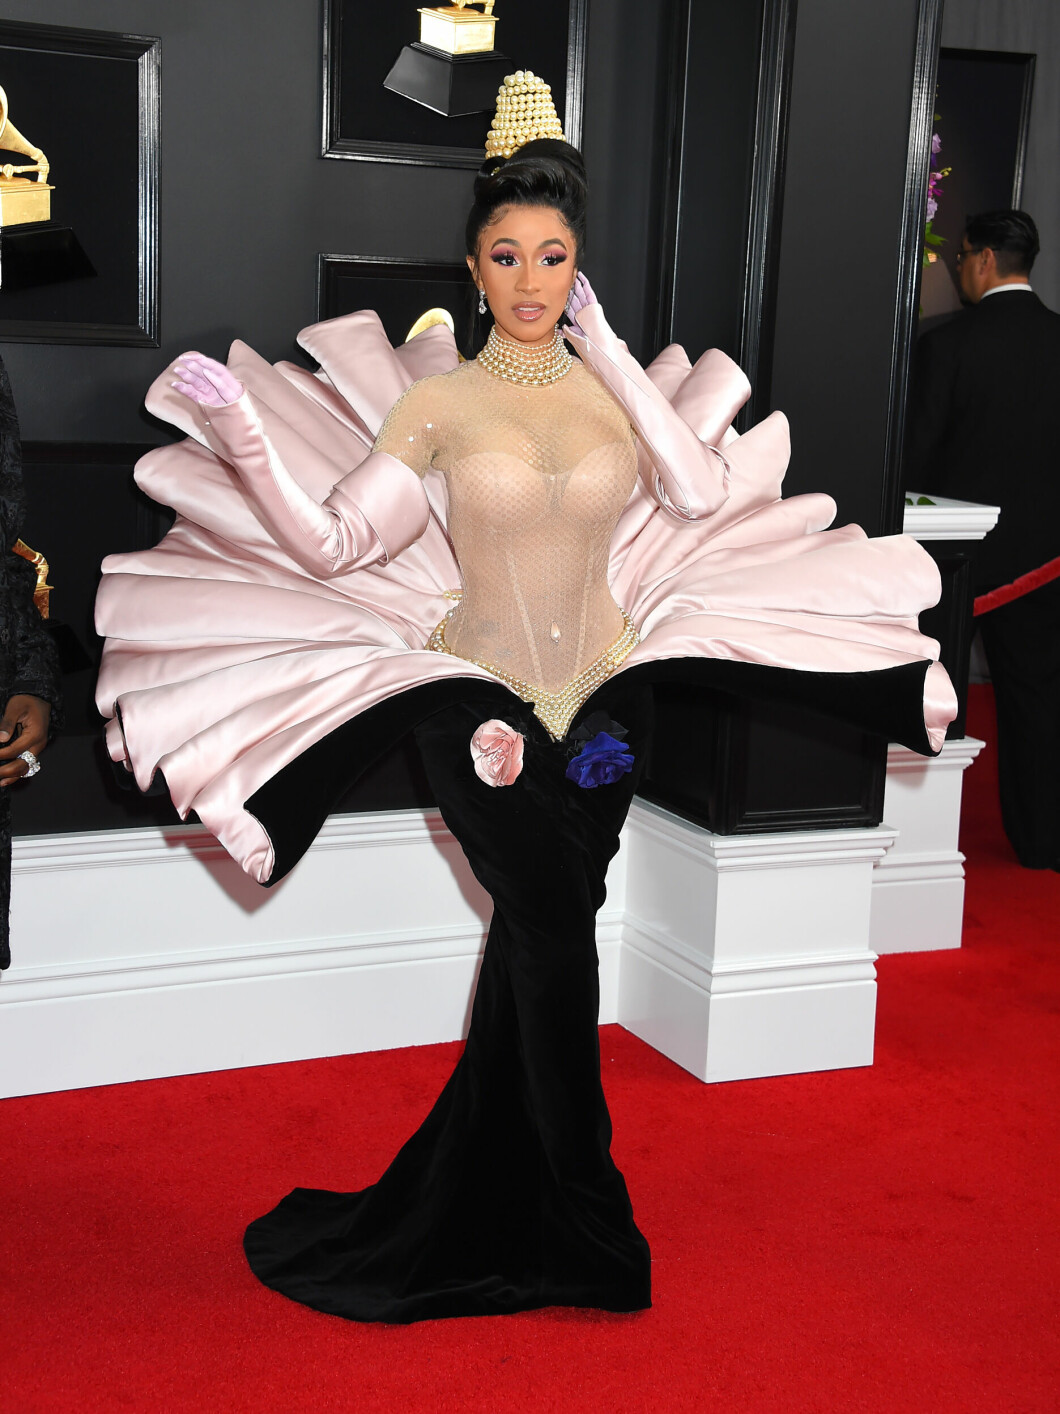 61st Annual GRAMMY Awards - Arrivals - Los Angeles.  Cardi B at the 61st Annual Grammy Awards held at Staples Center on February 10, 2019 in Los Angeles, California.  URN: 41147141 Foto: Arroyo-O'Connor / AFF-USA.COM